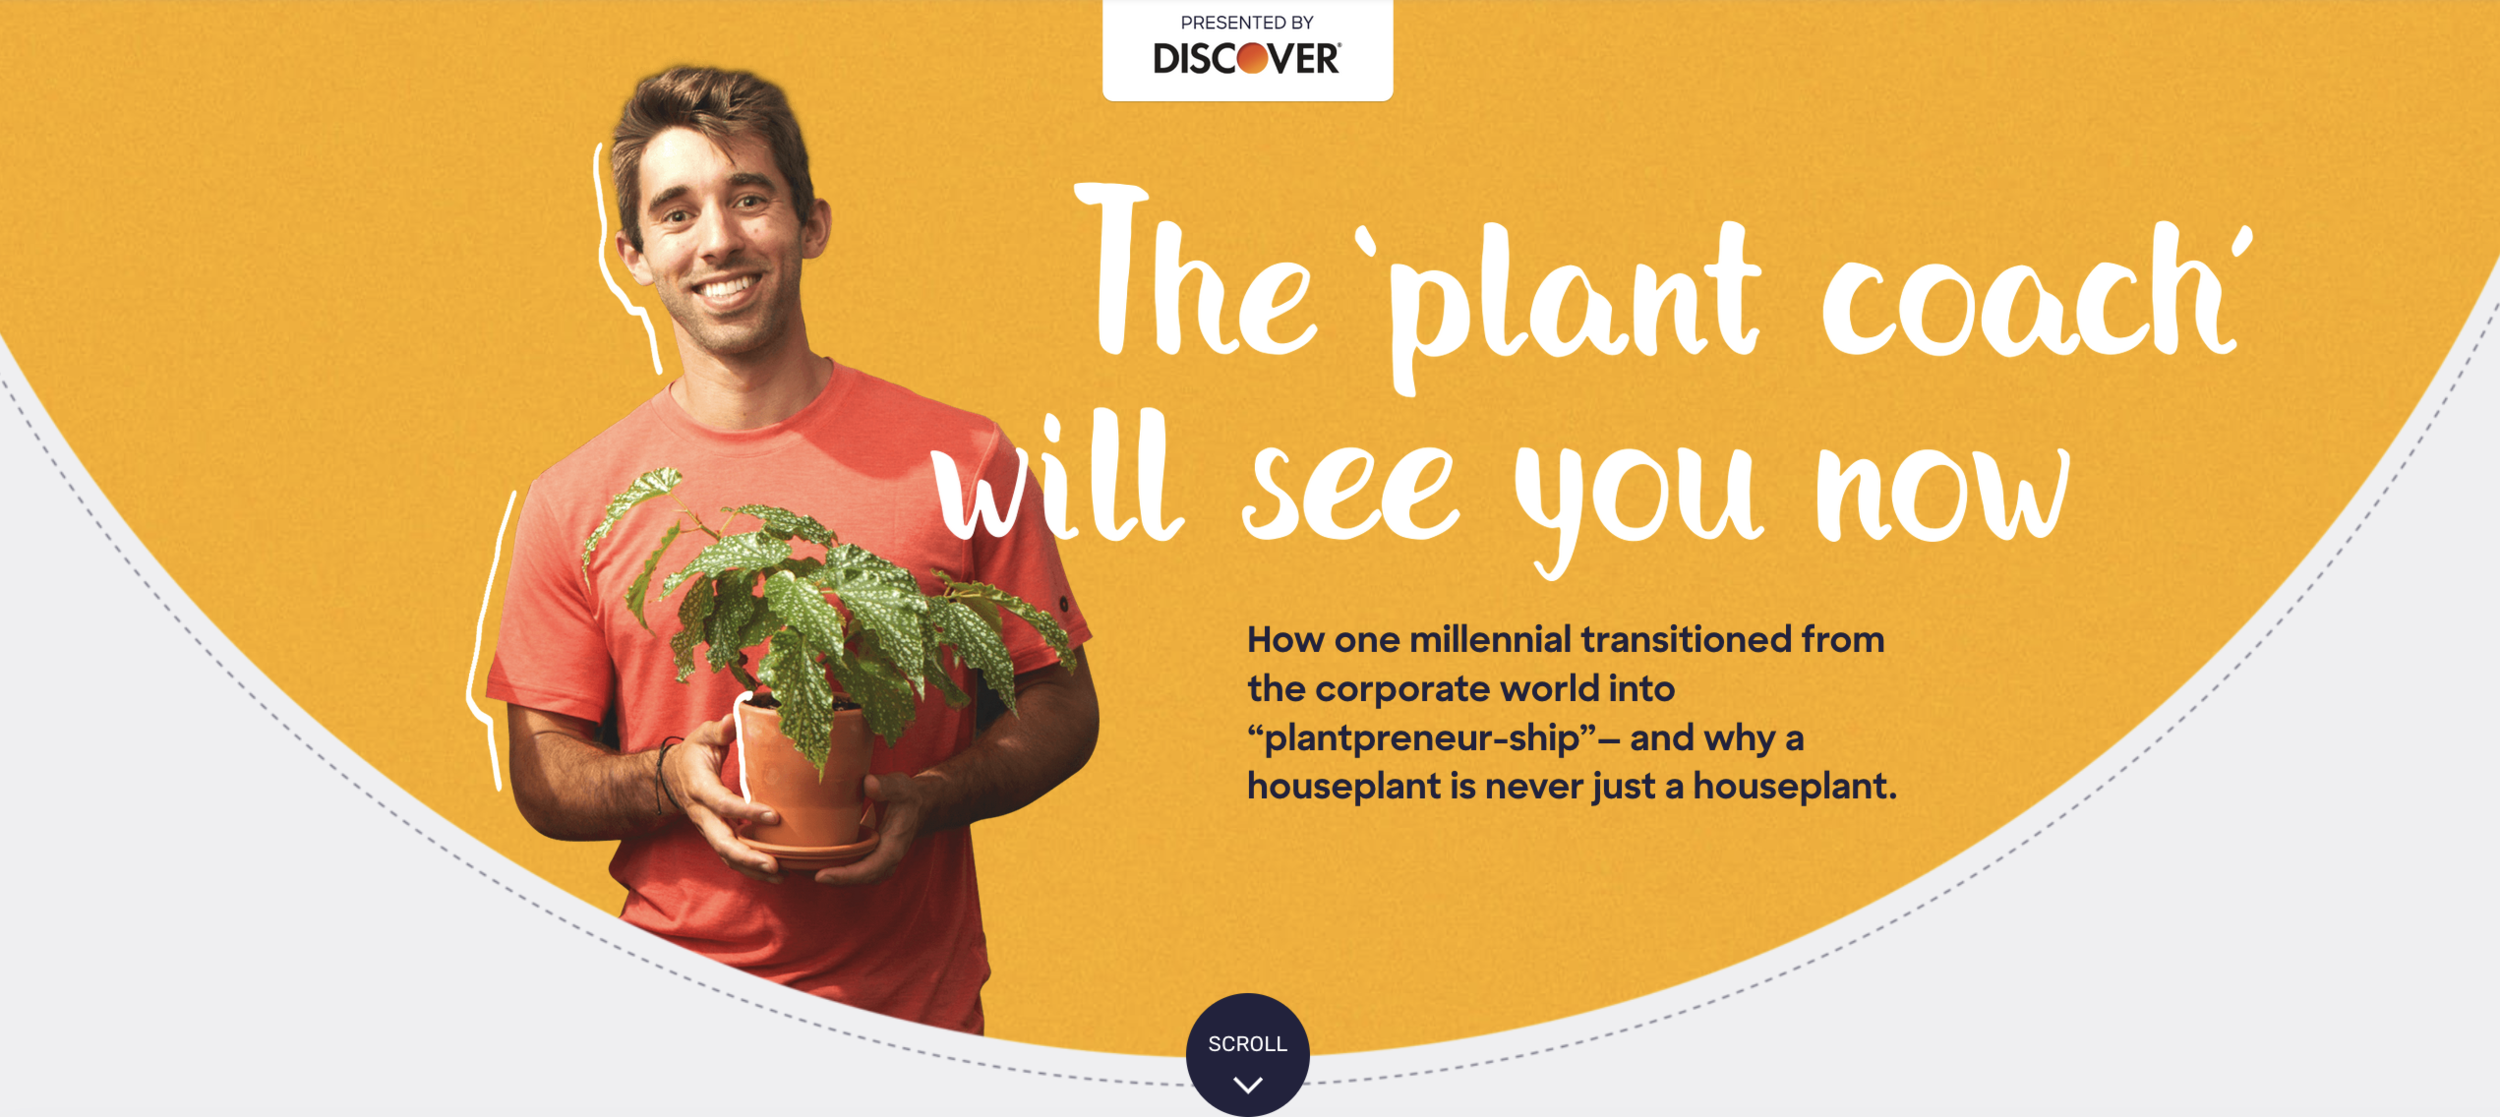 Plant Coach - Discover and INGREDIENT case study